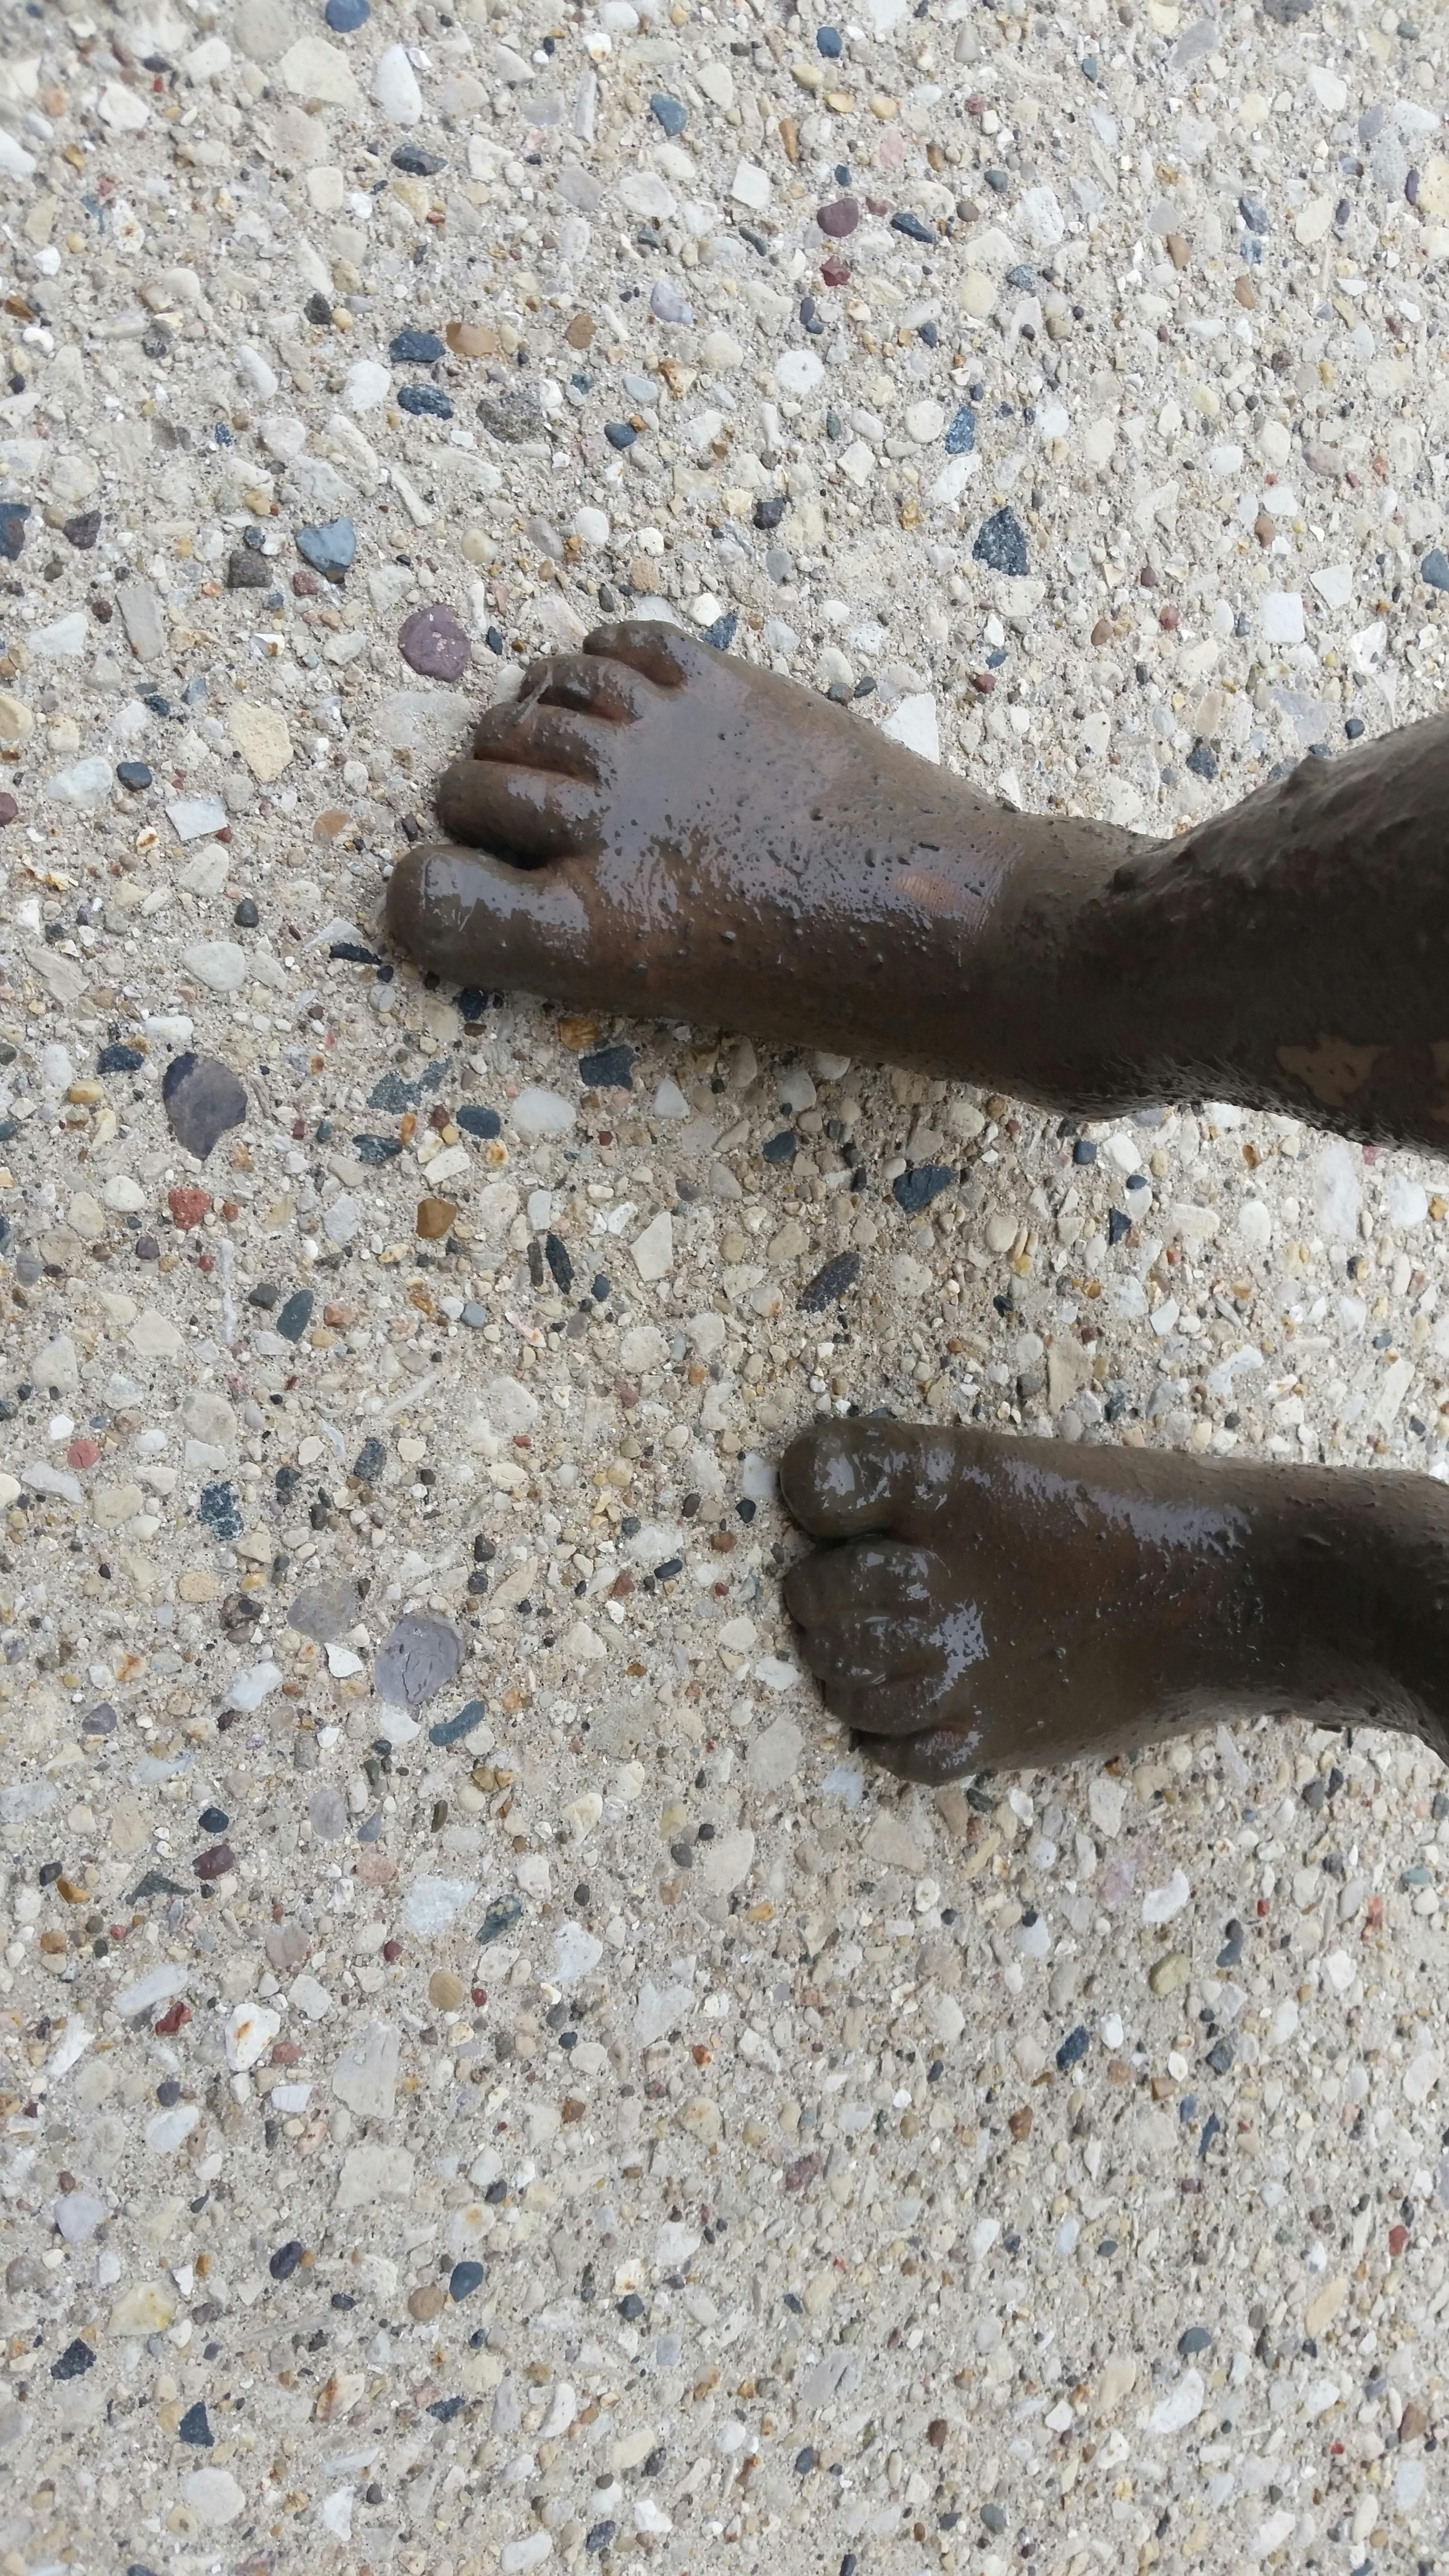 Free stock photo of muddy toes